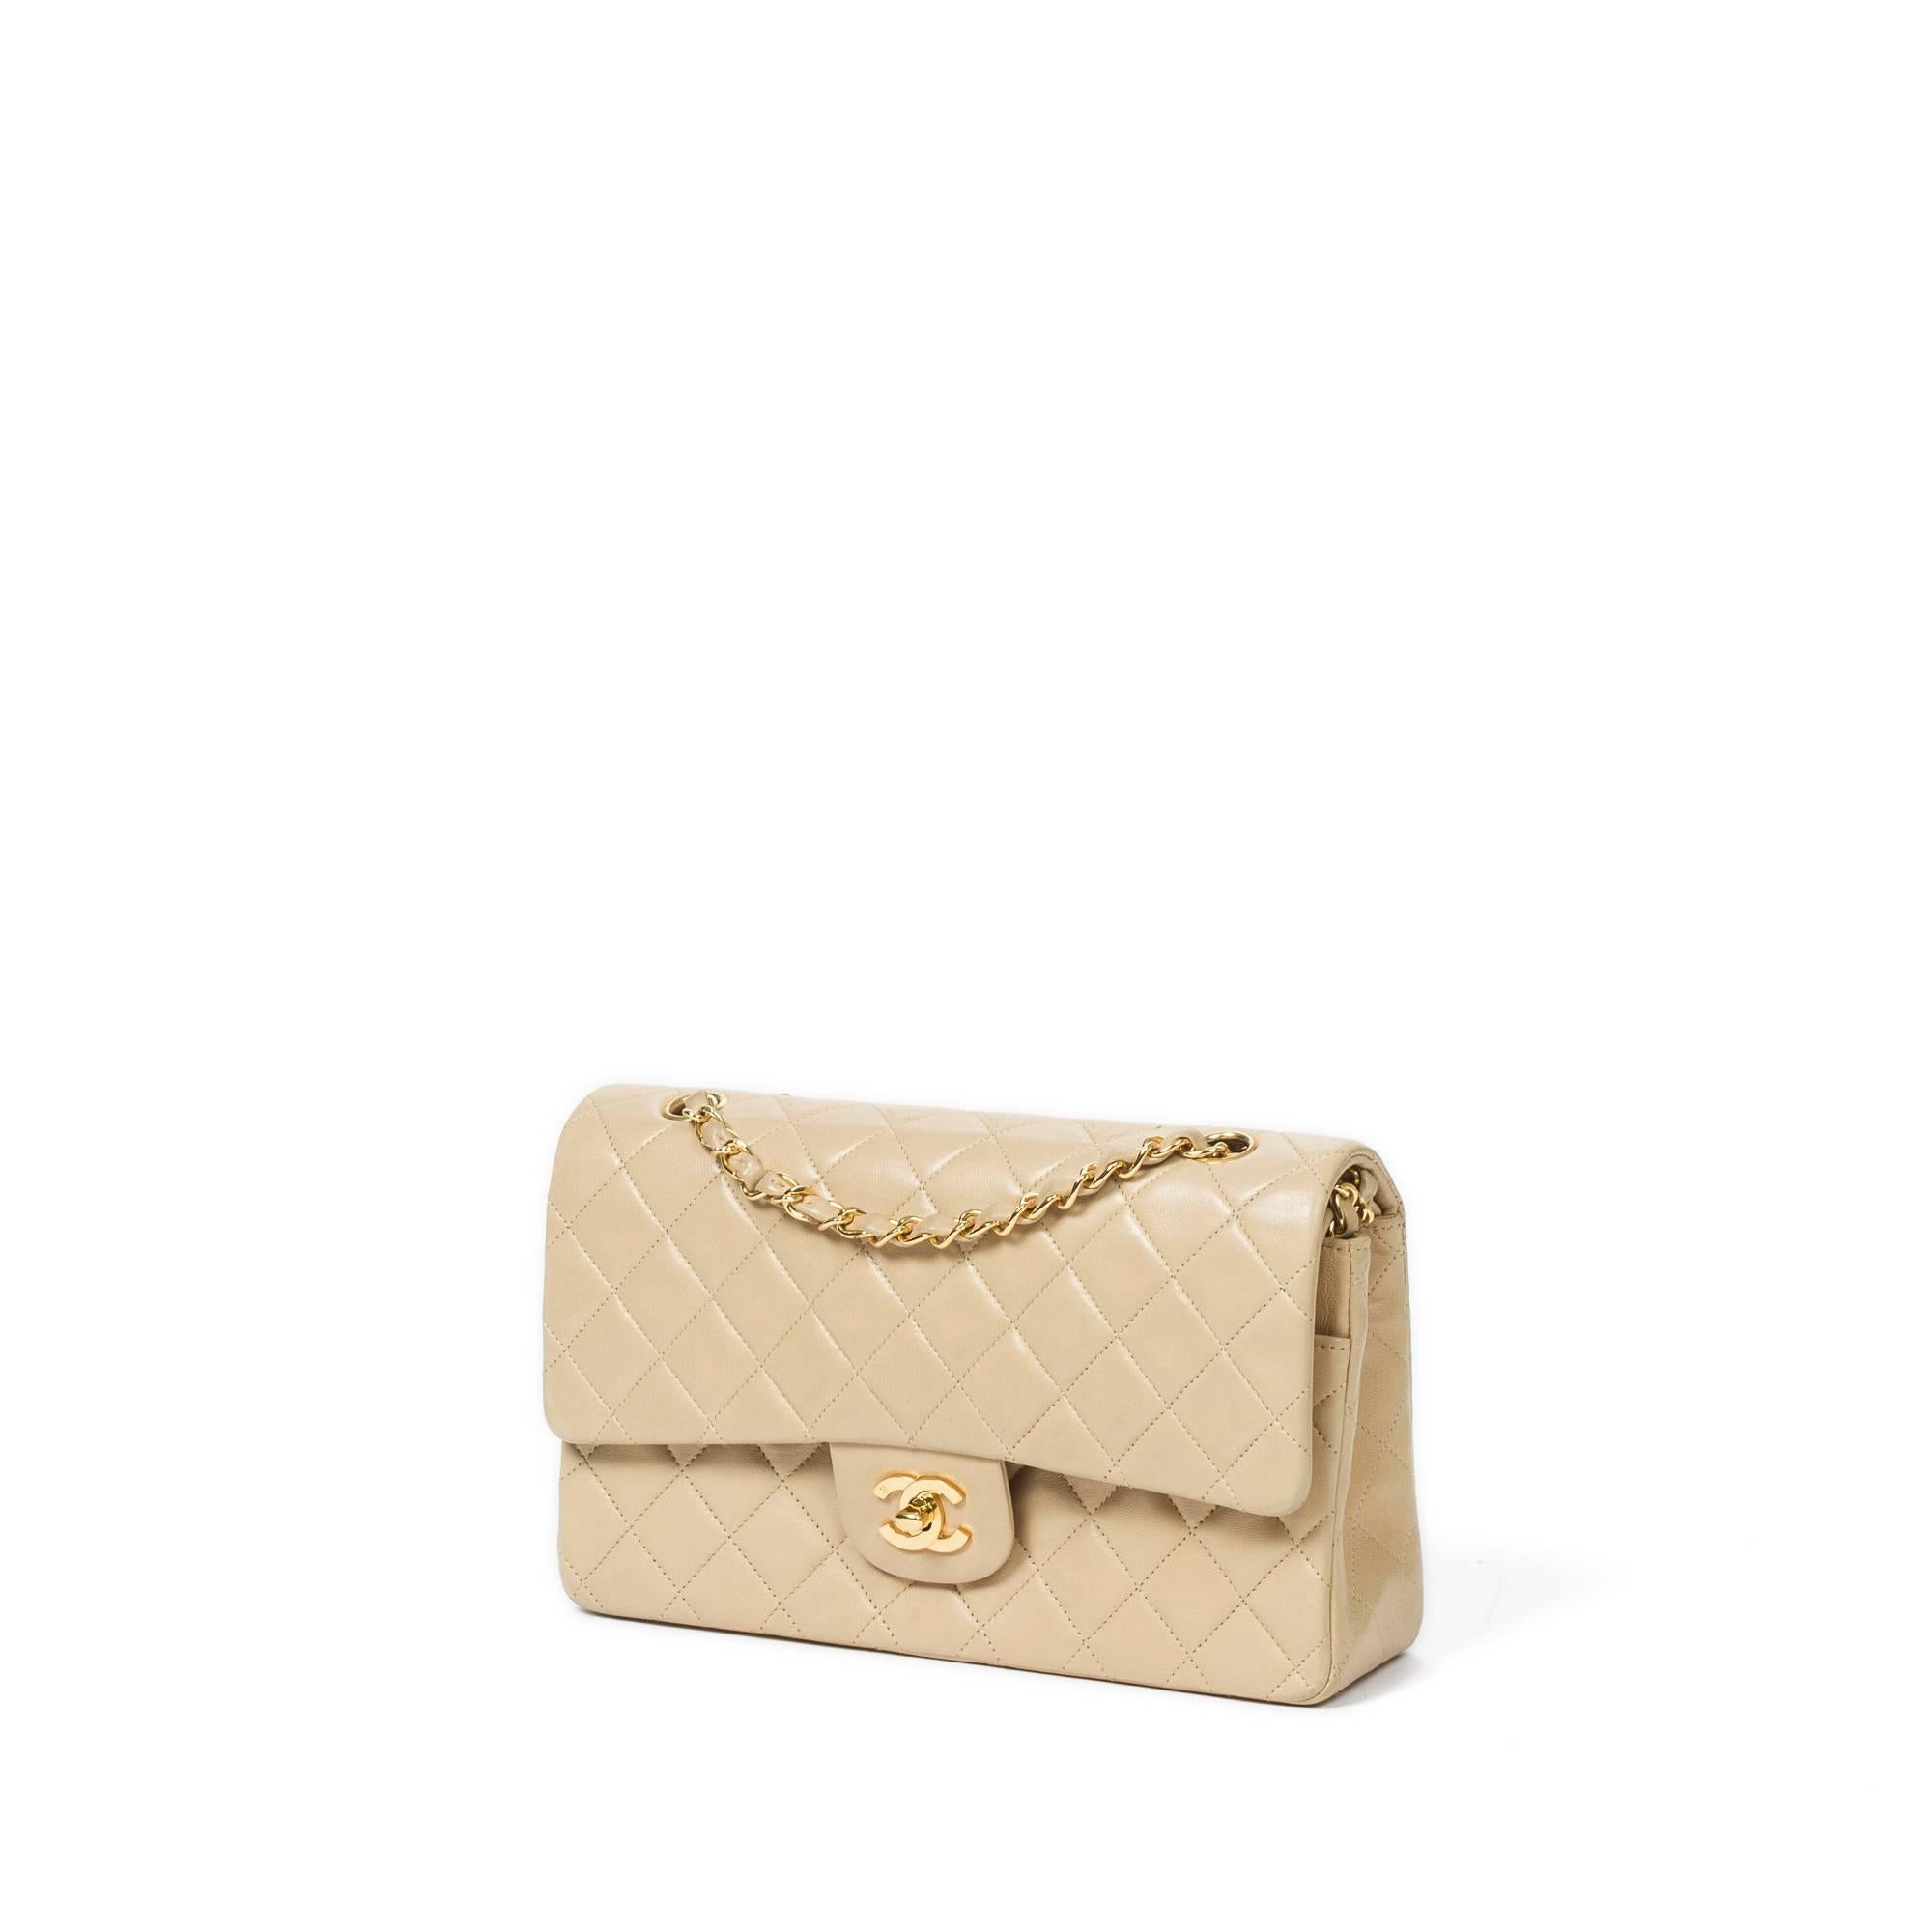 Chanel Classic Double Flap 26cm in beige quilted leather with double chain strap (22cm -double strap, 40cm - single strap), gold tone CC turlock and hardware. Beige leather lined interior with 3 compartments. Unfortunately, this bag has lost its